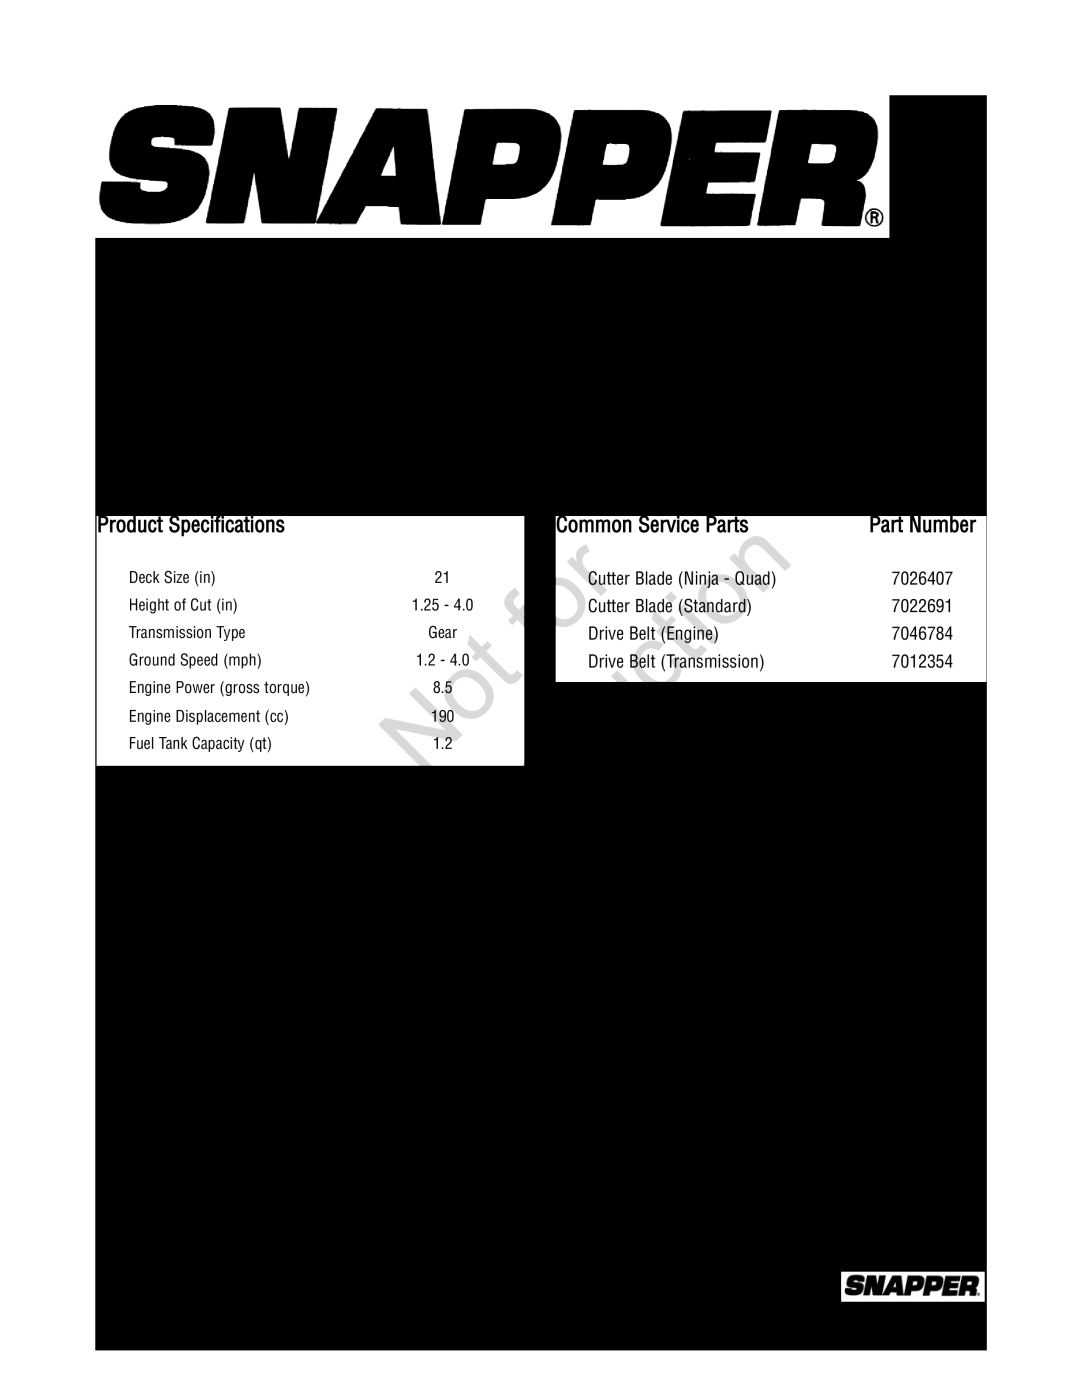 Snapper 20 manual 21” STEEL DECK, Product Specifications, Common Service Parts, Walk Mowers Commercial Models Series 